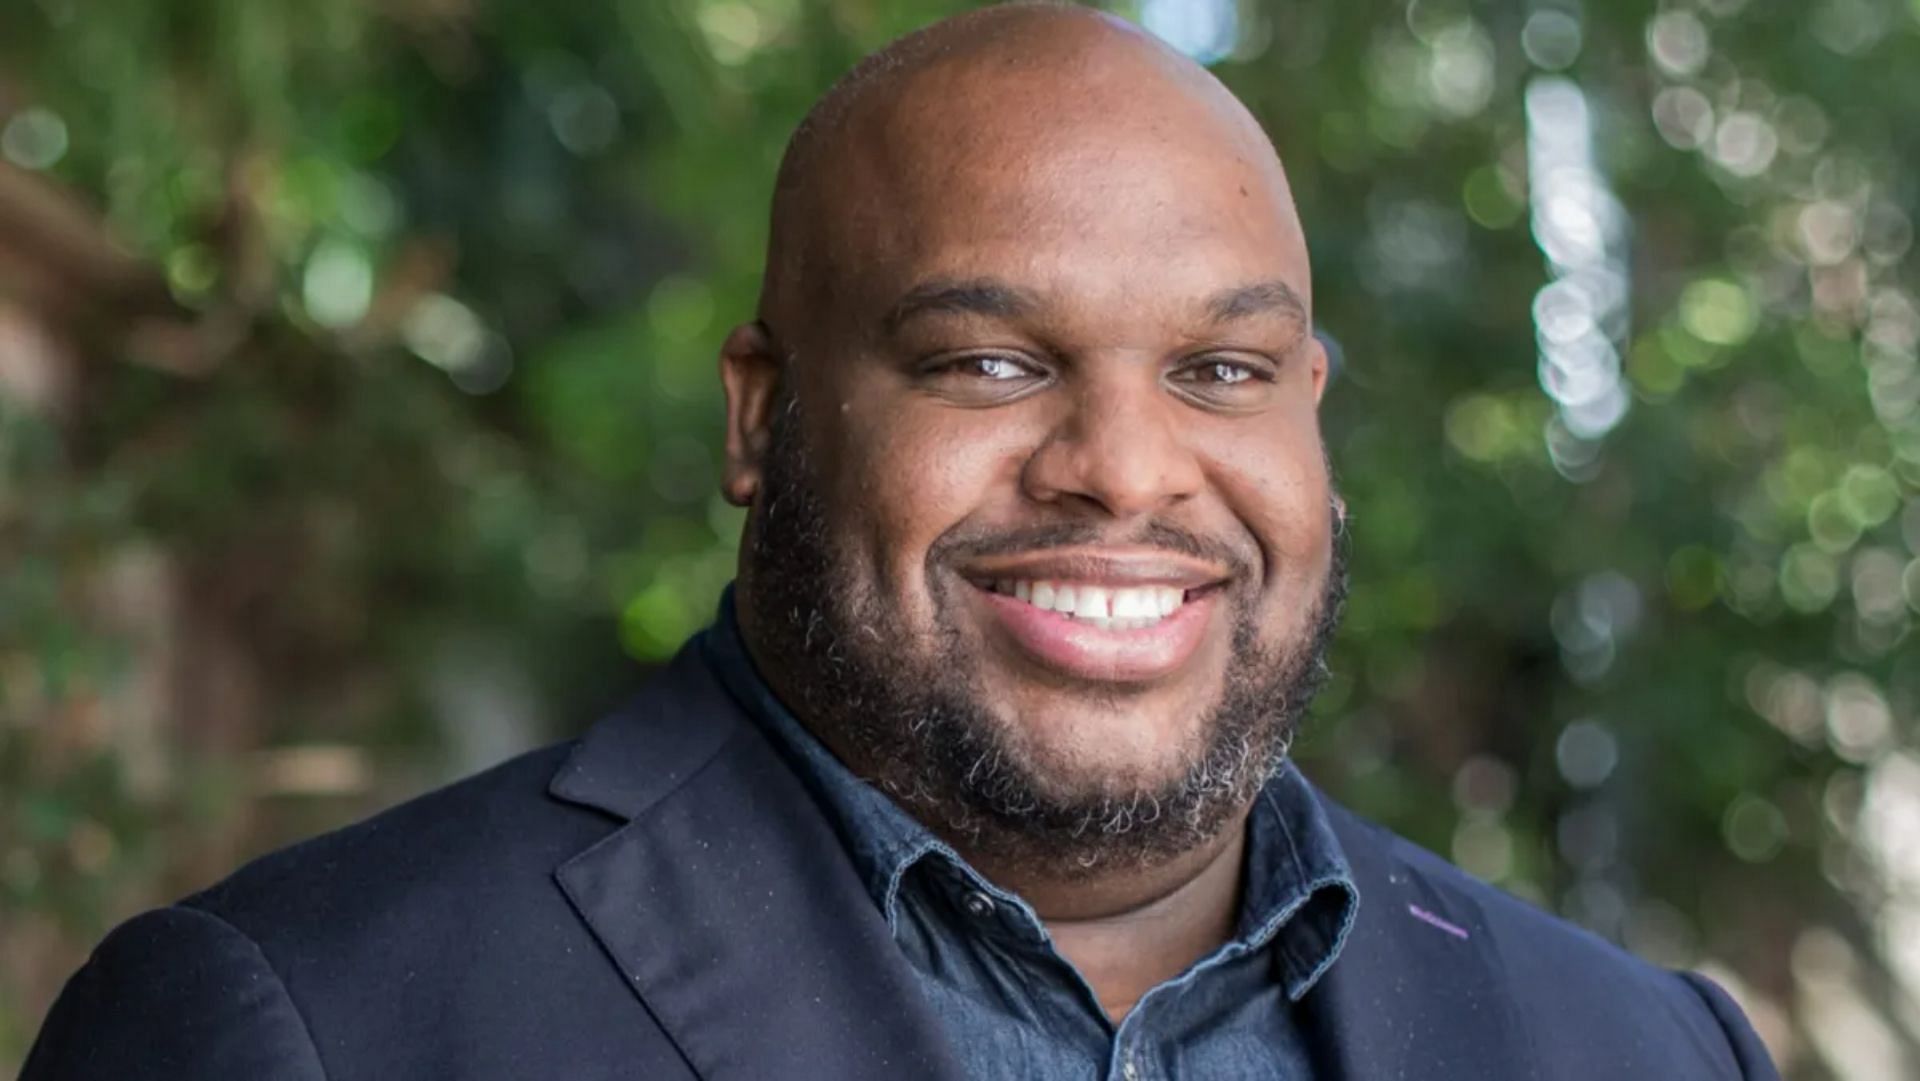 Christian Leaders Offer Prayers and Support for Pastor John Gray After Hospitalization for ‘Severe’ Pulmonary Embolism